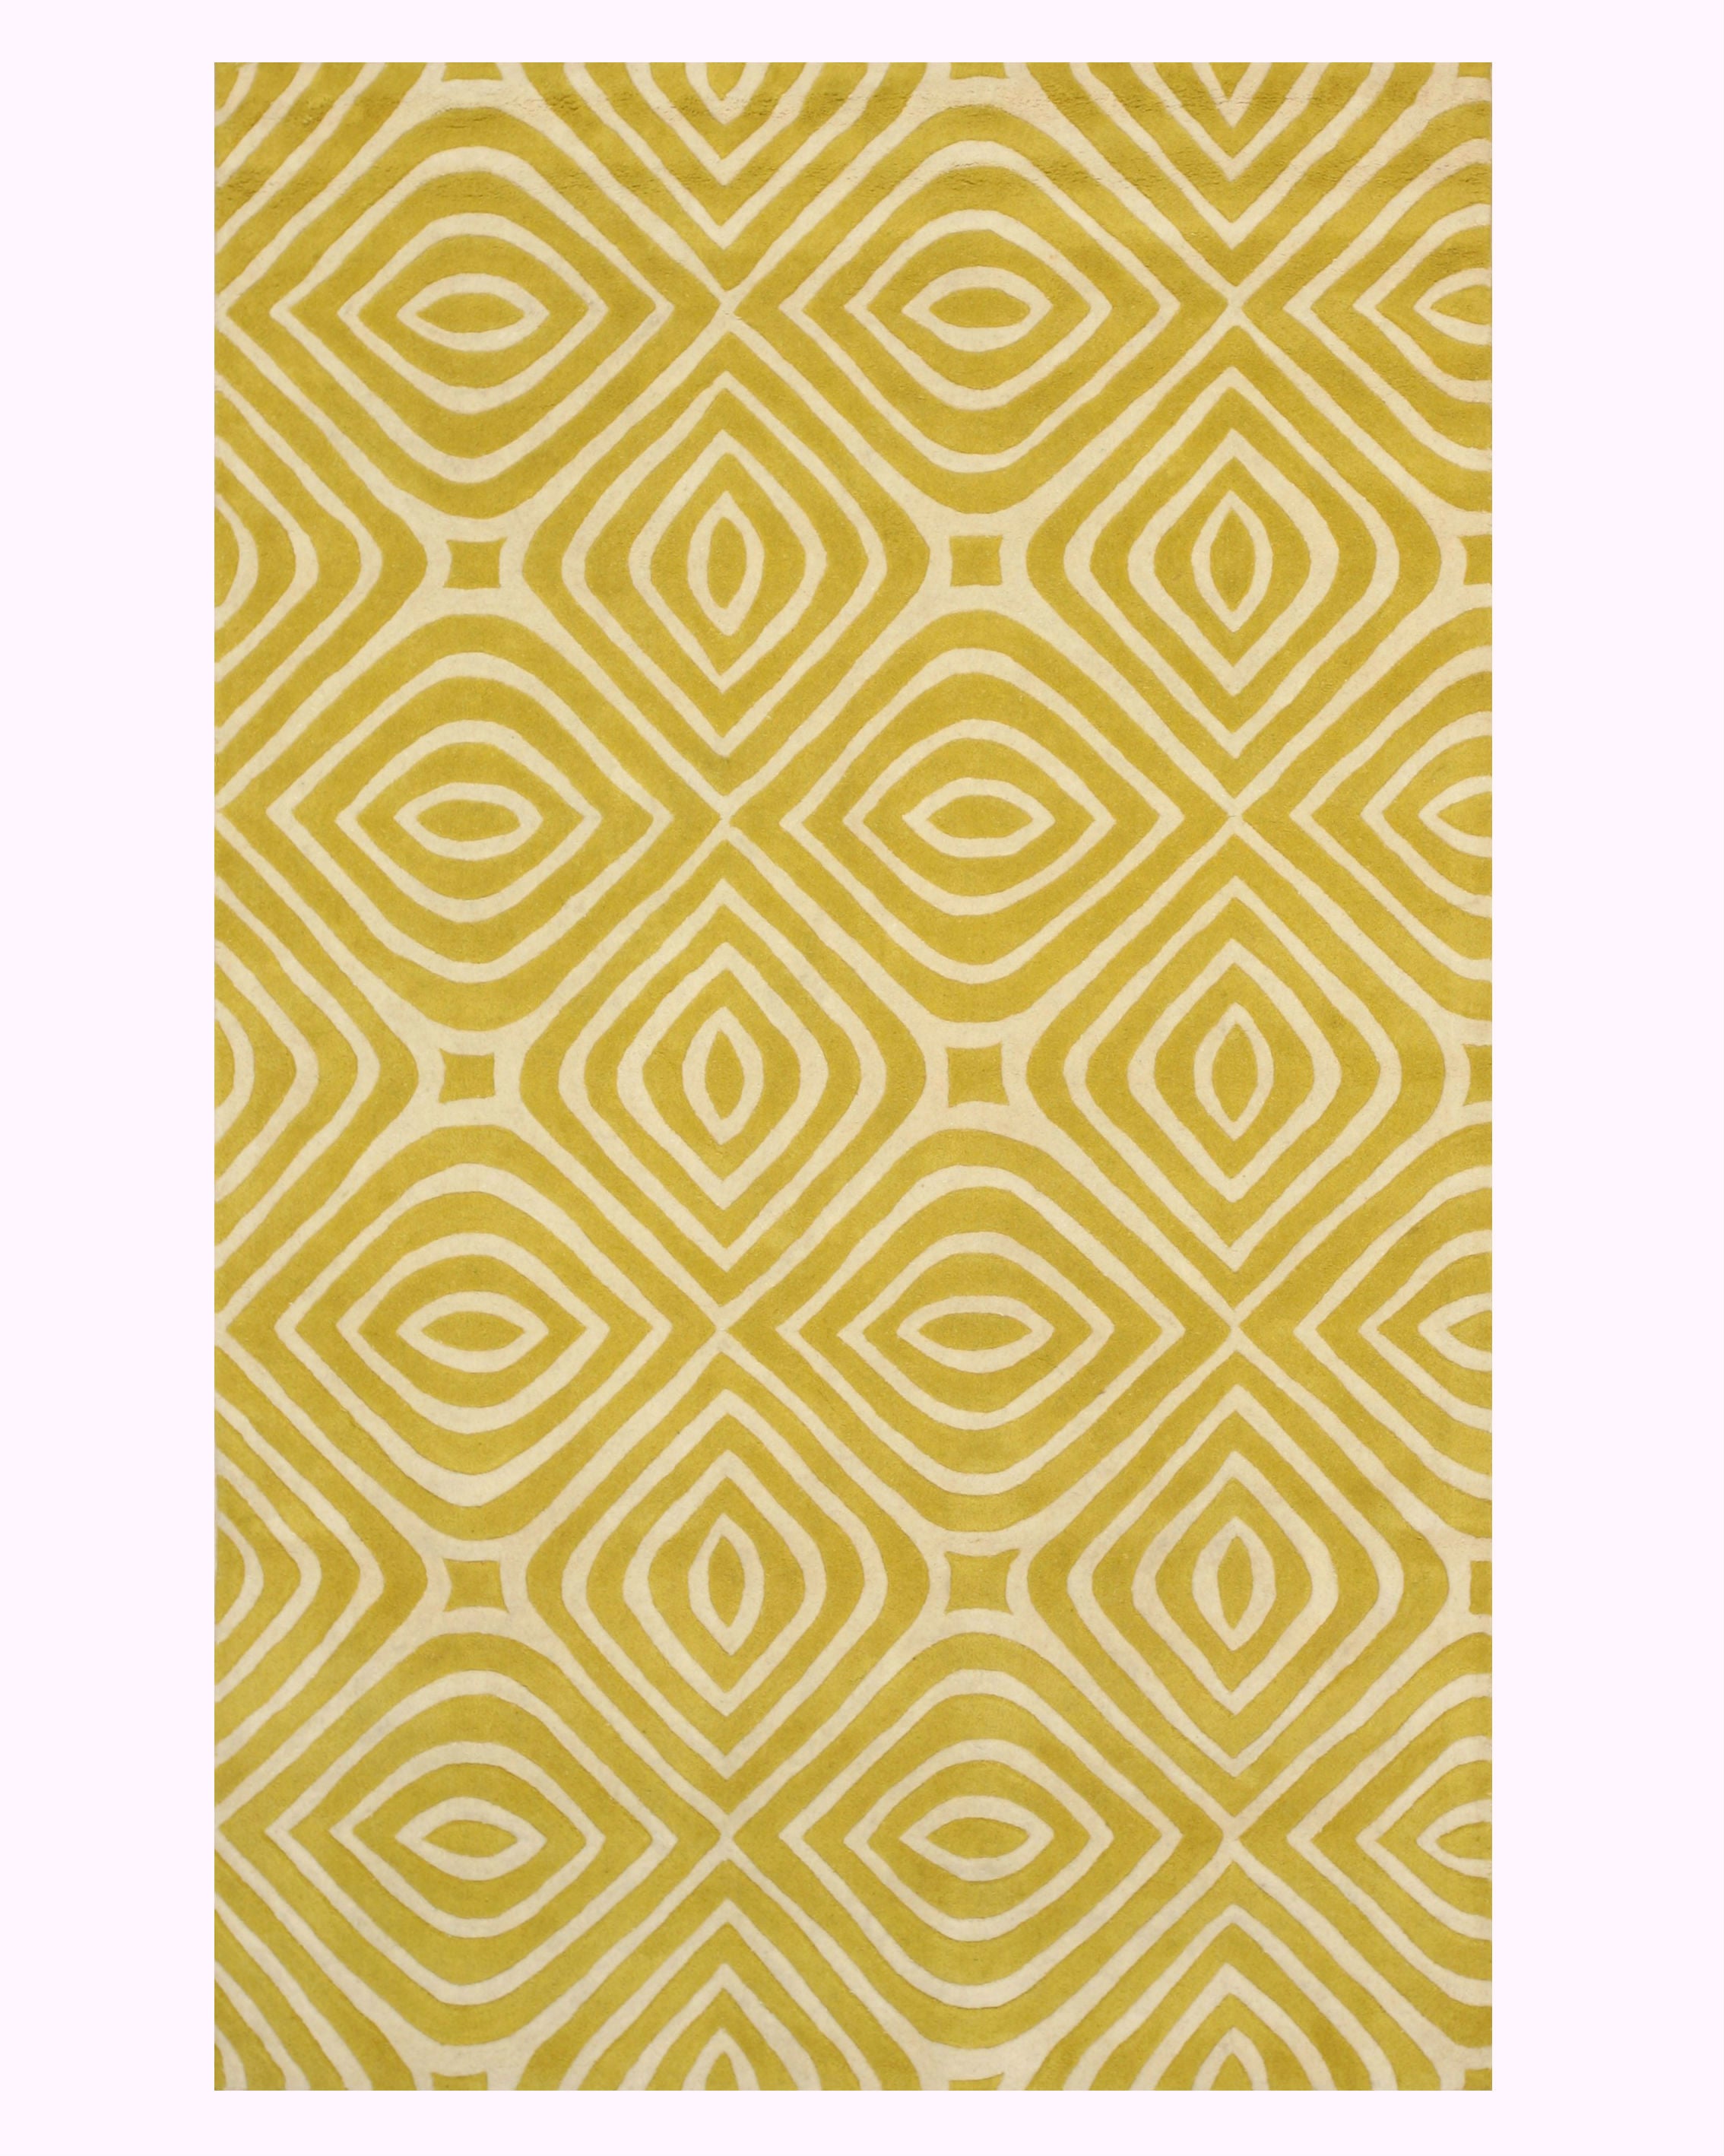 EORC Hand-tufted Wool Yellow Transitional Geometric Marla Rug